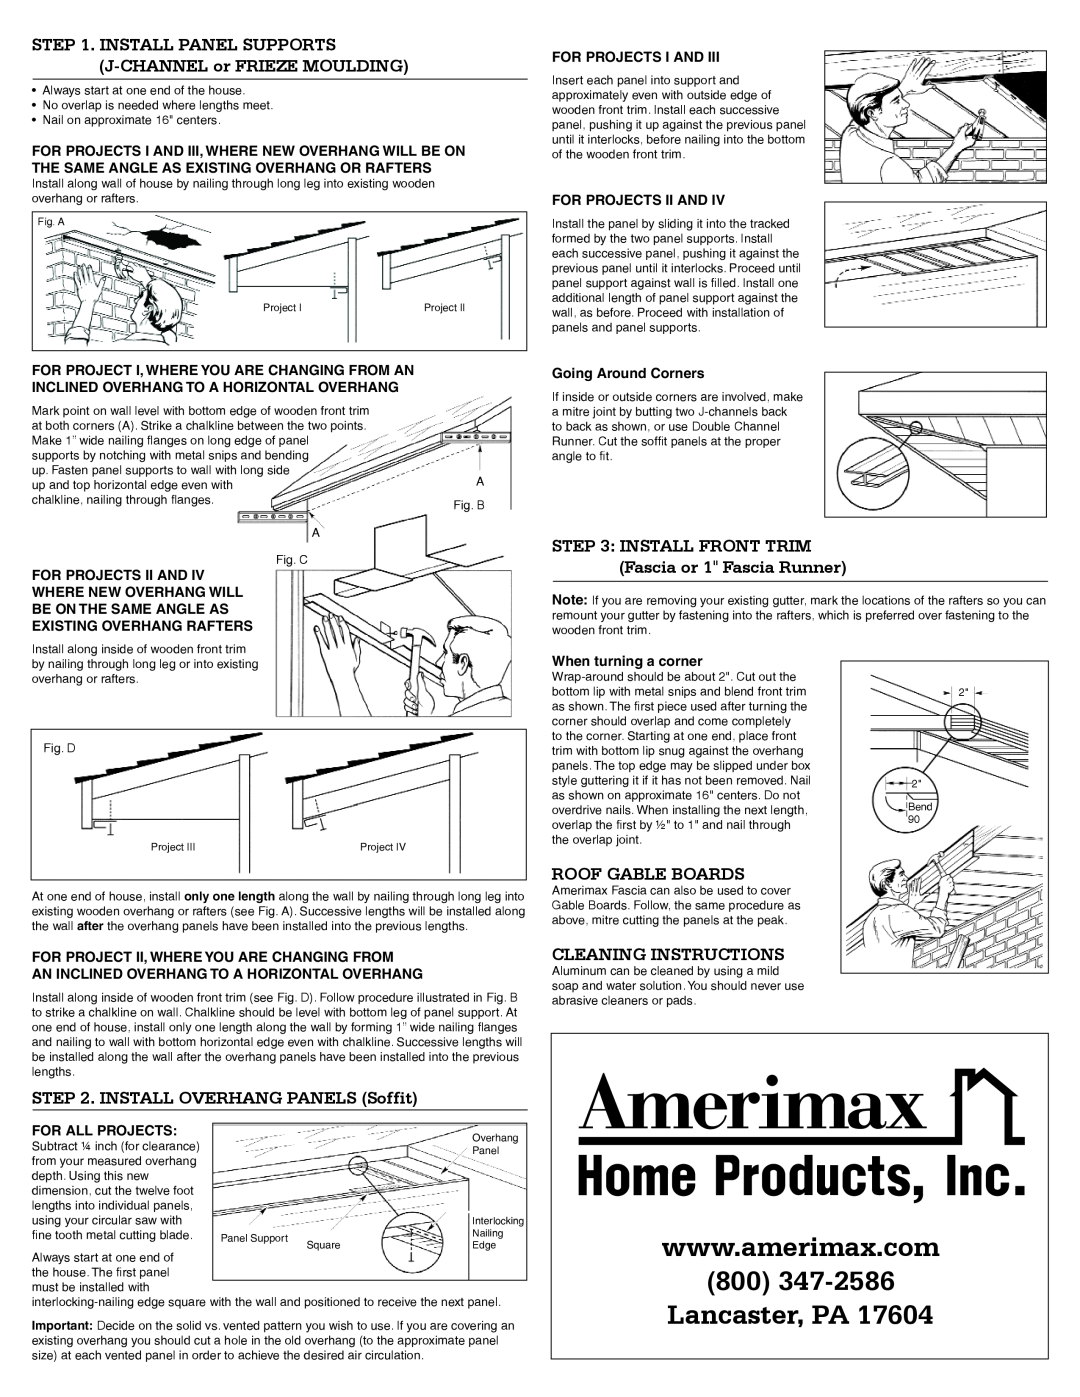 Amerimax Home Material installation instructions INSTALL OVERHANG PANELS Soffit, Roof Gable Boards, Cleaning Instructions 